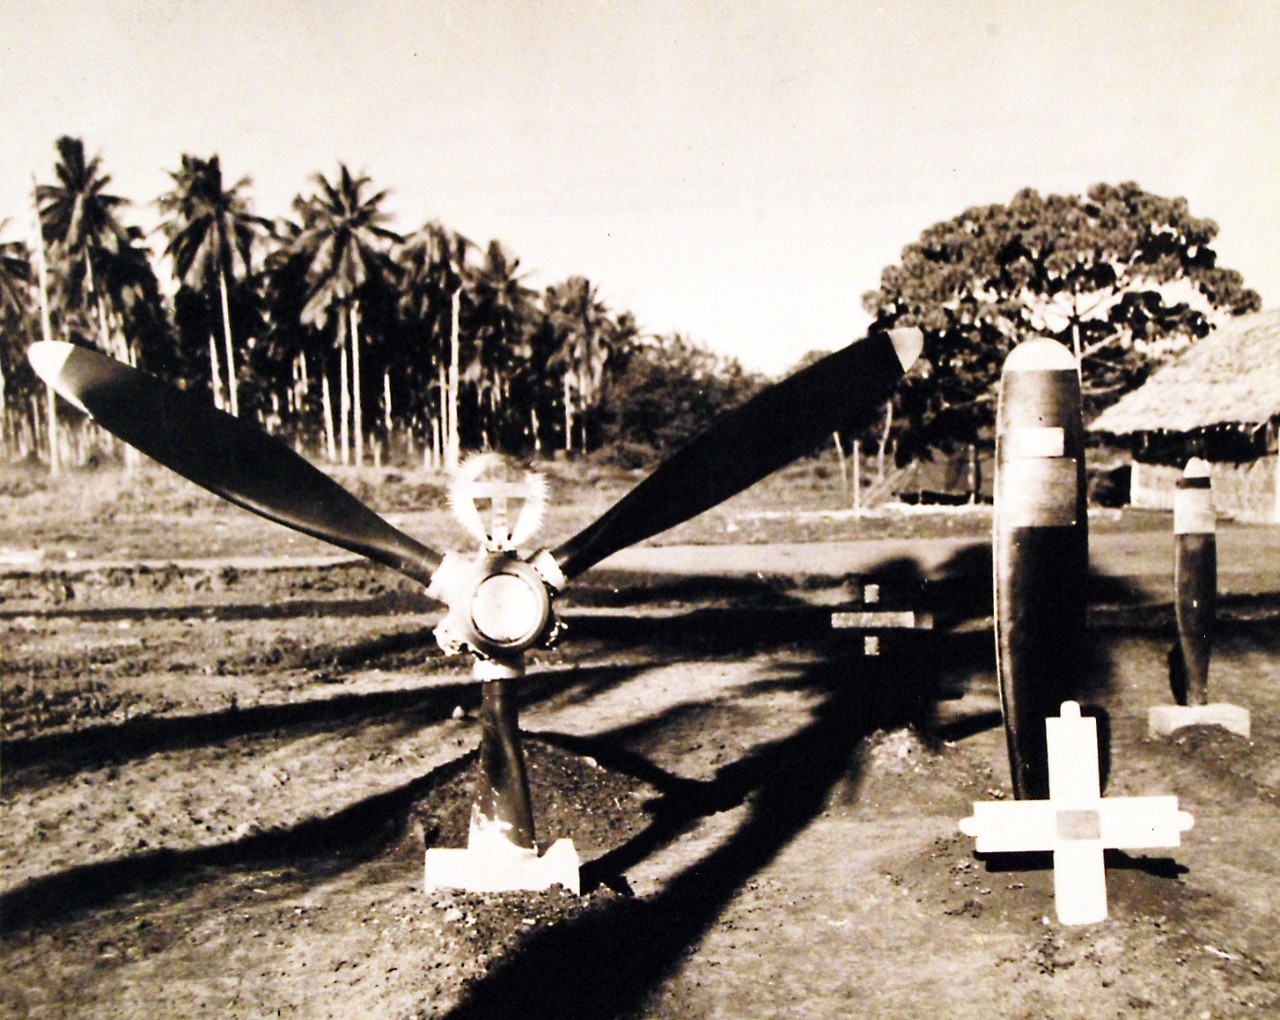 80-G-54613: Guadalcanal.  Propeller wings designate the last resting place of American aviators who died in defense of Guadalcanal Island, Solomon Islands.   Photograph released September 29, 1943.  U.S. Navy Photograph, now in the collections of the National Archives.  (2016/11/25).